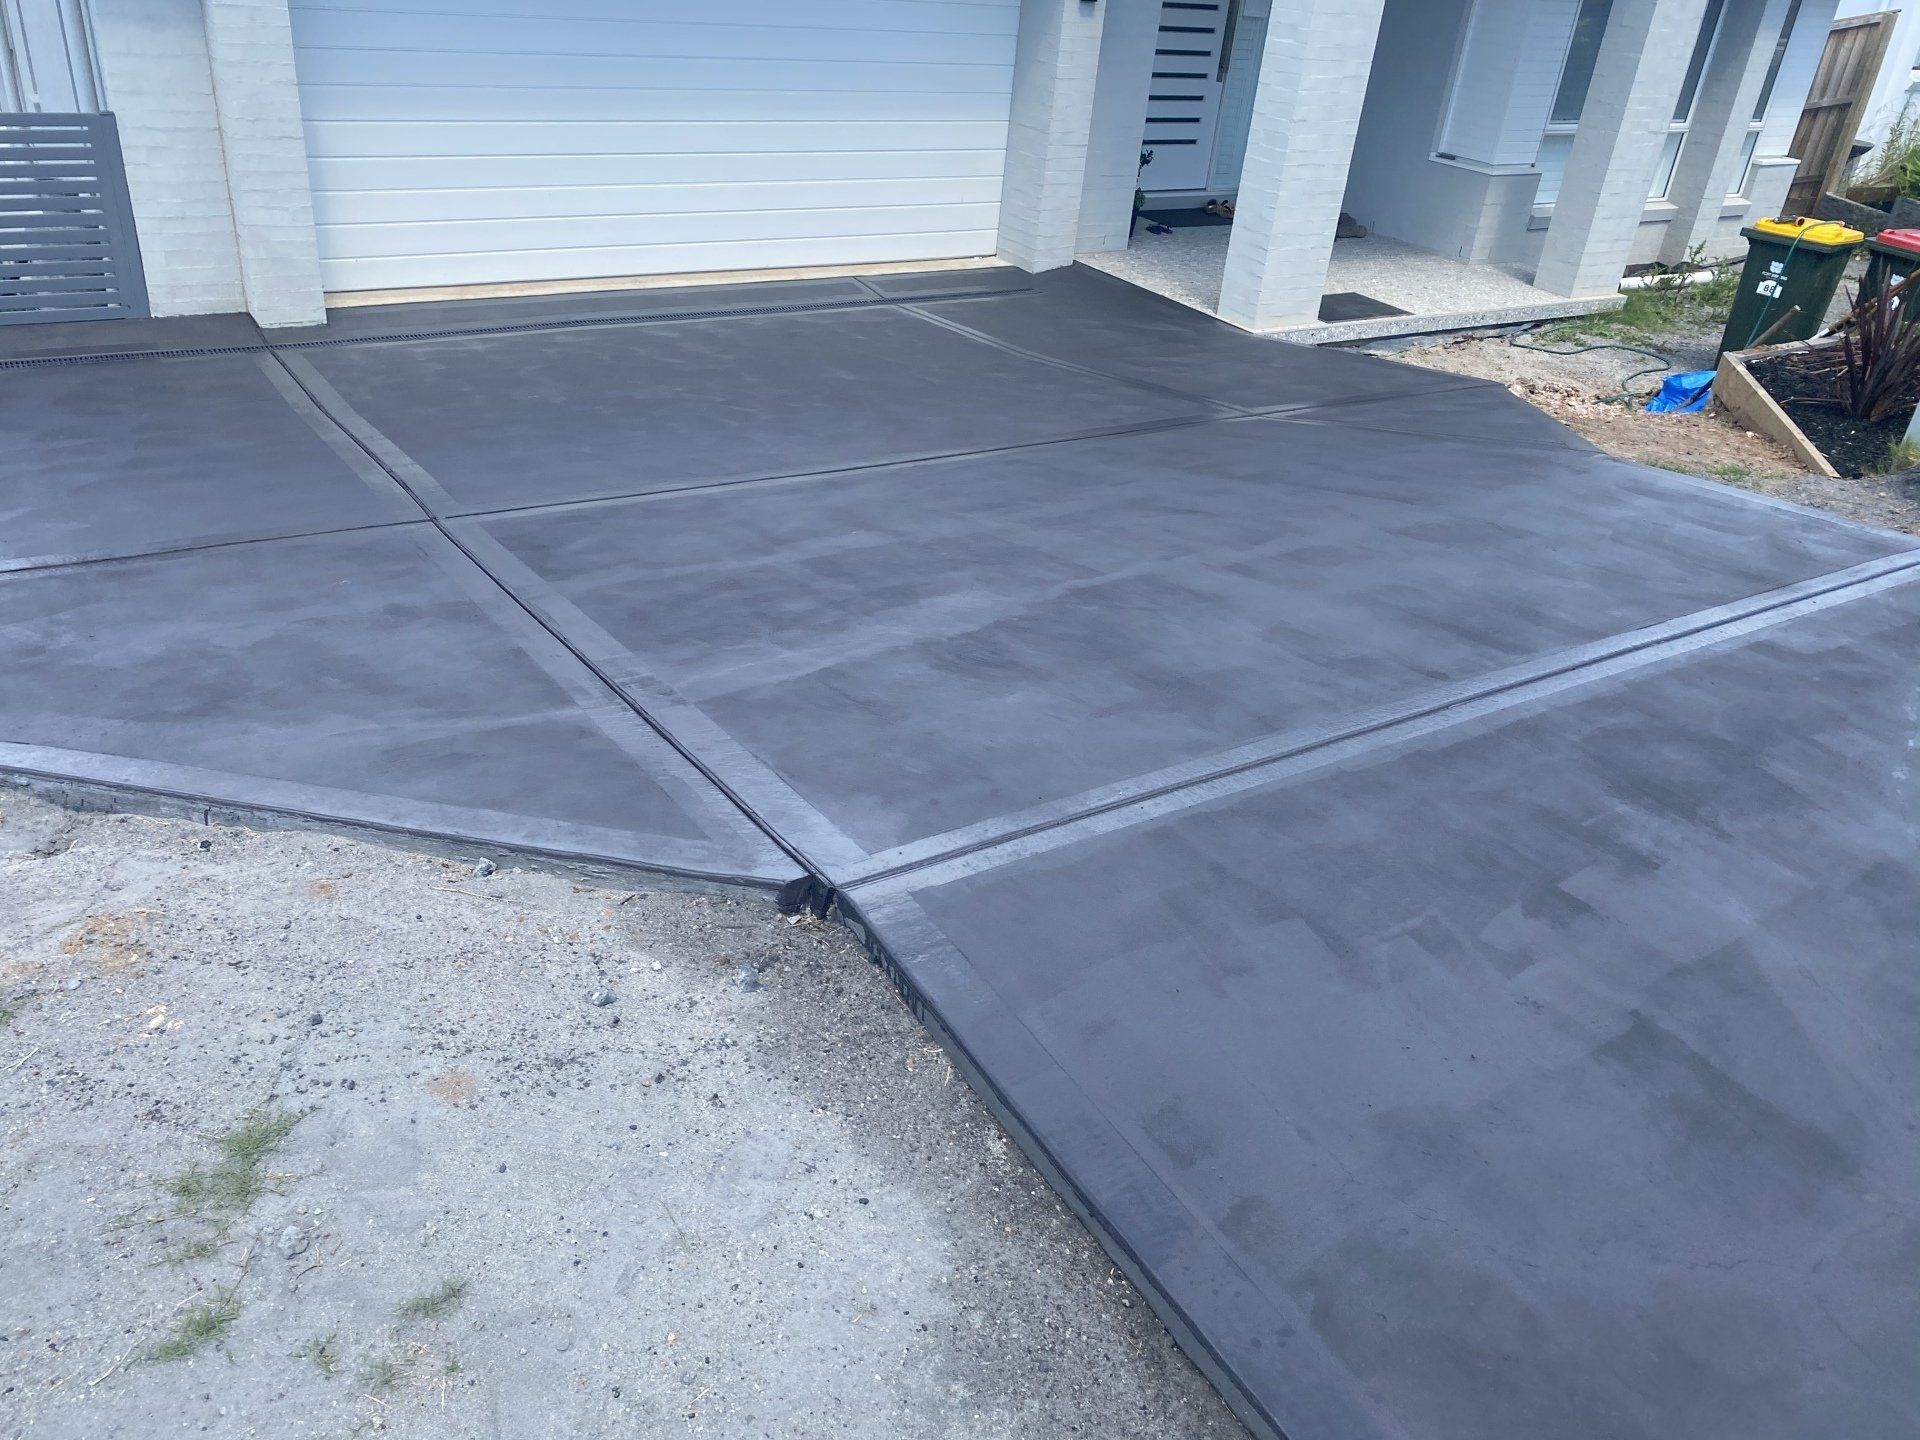 Newly Poured Concrete For Driveway — Concreting Works in Port Stephens, NSW